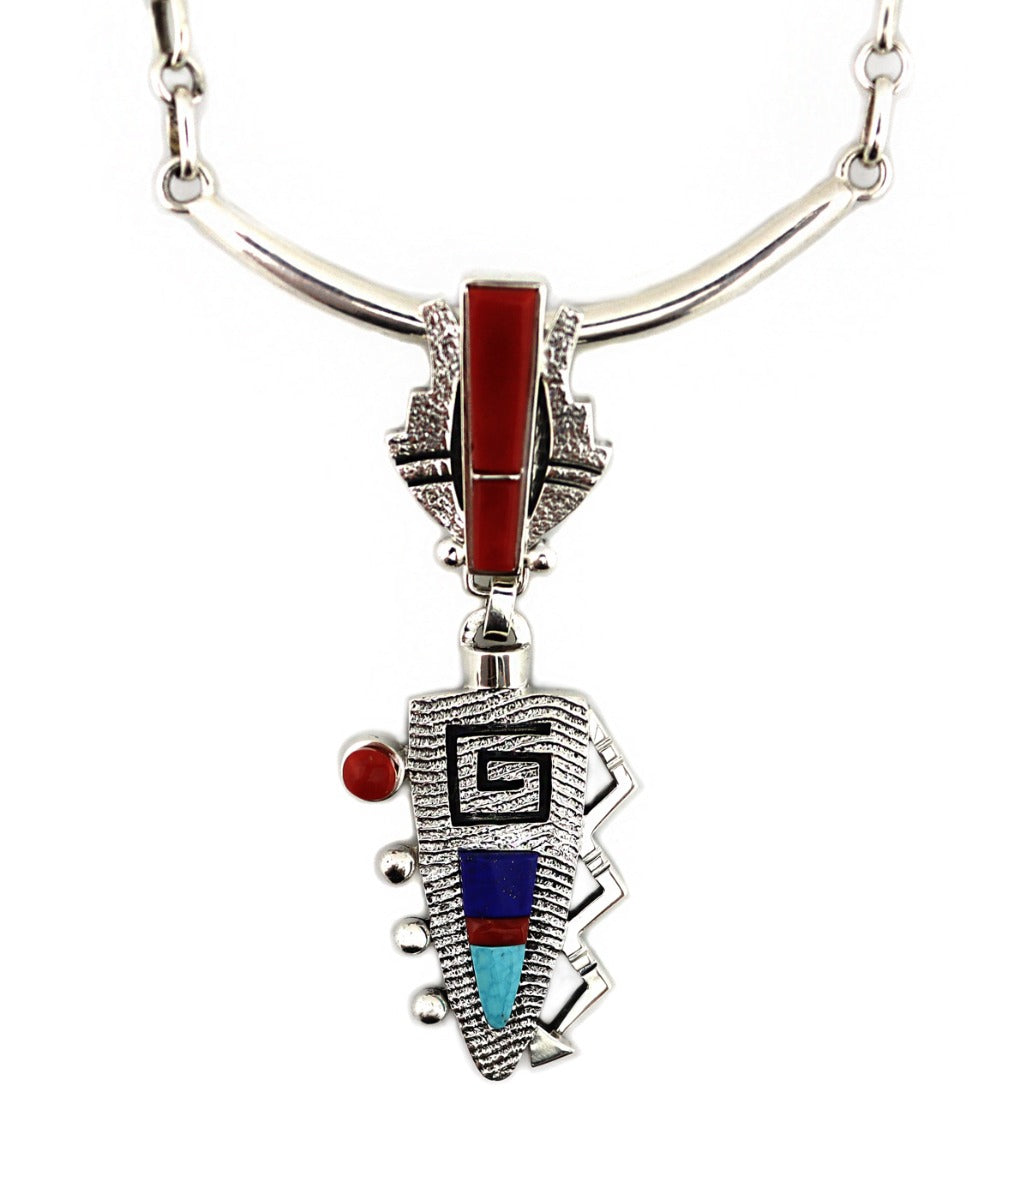 Roy Talahaftewa - Hopi Contemporary Multi-Stone Inlay and Sterling Silver Tufacast Pendant with Handmade Silver Chain, 21" length, 3.25" x 1.125" pendant (J14893)